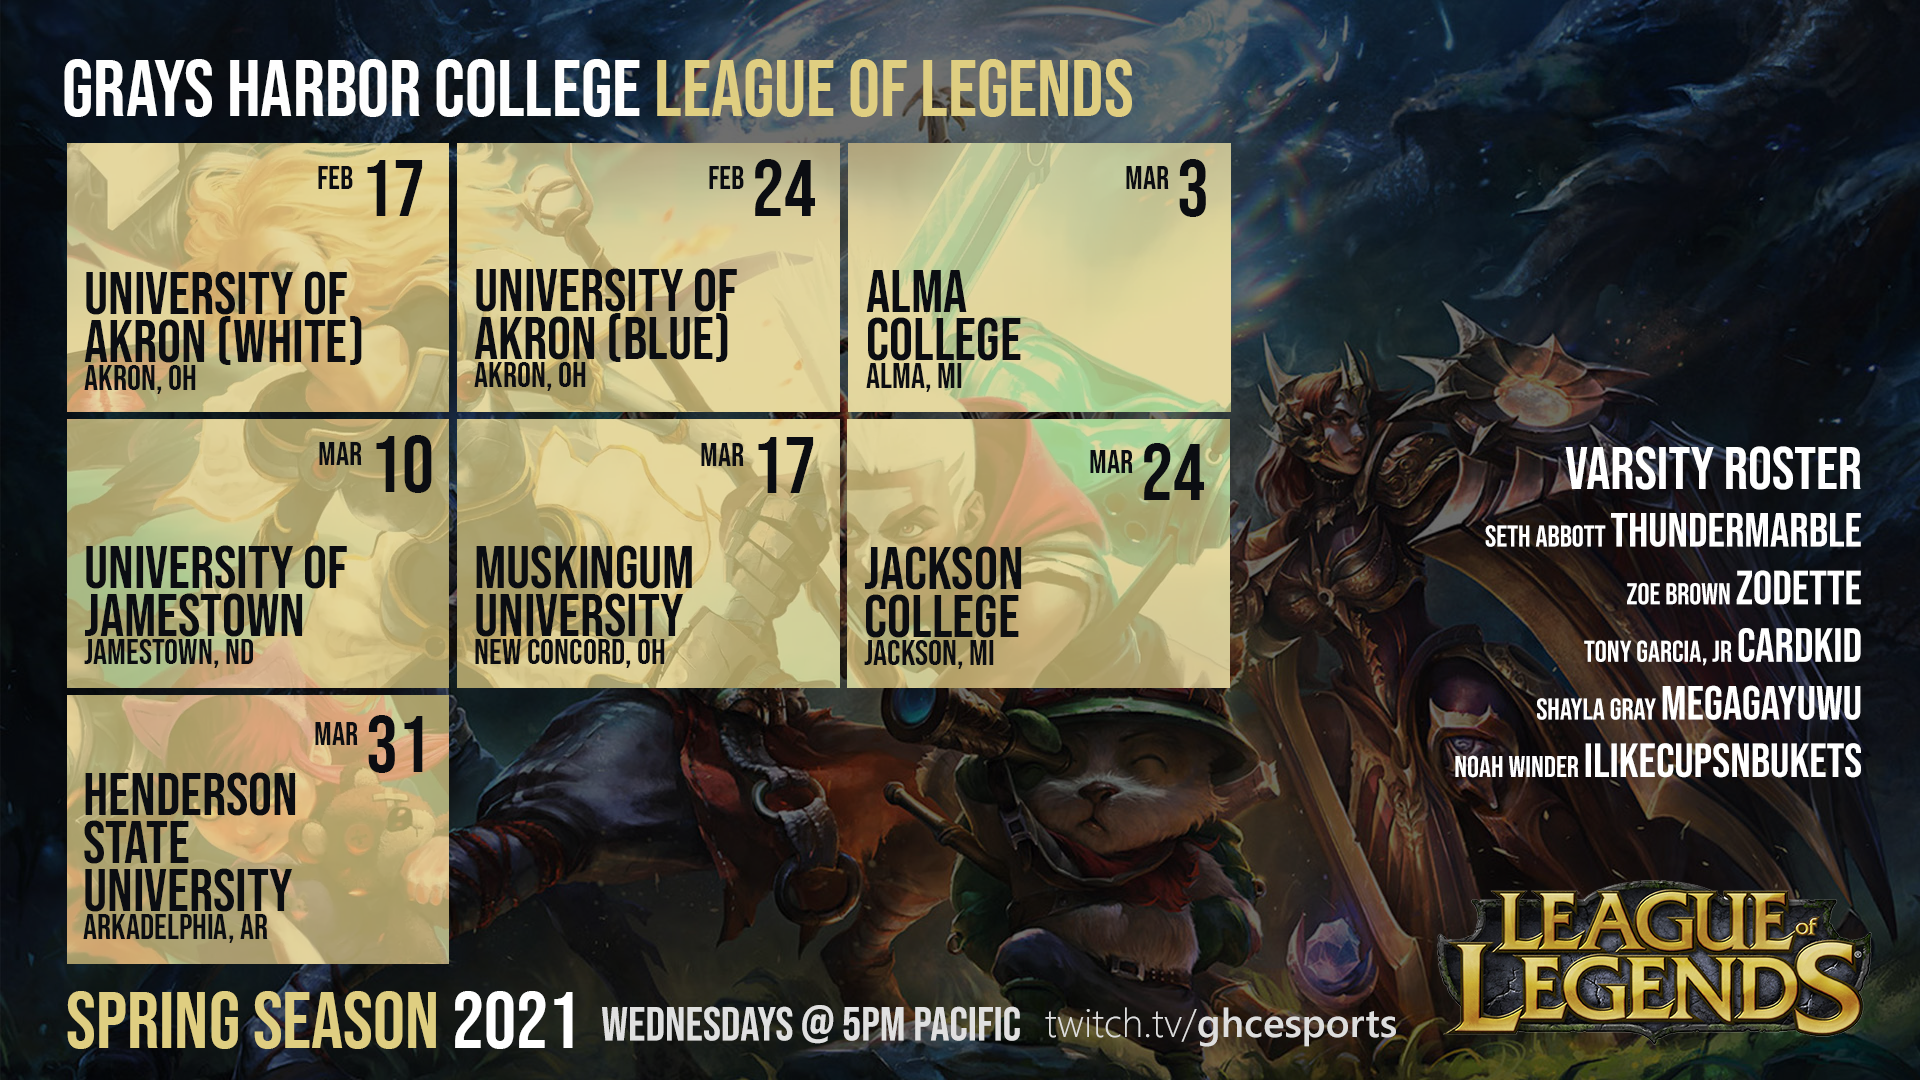 A schedule of League of Legends games listed below in text